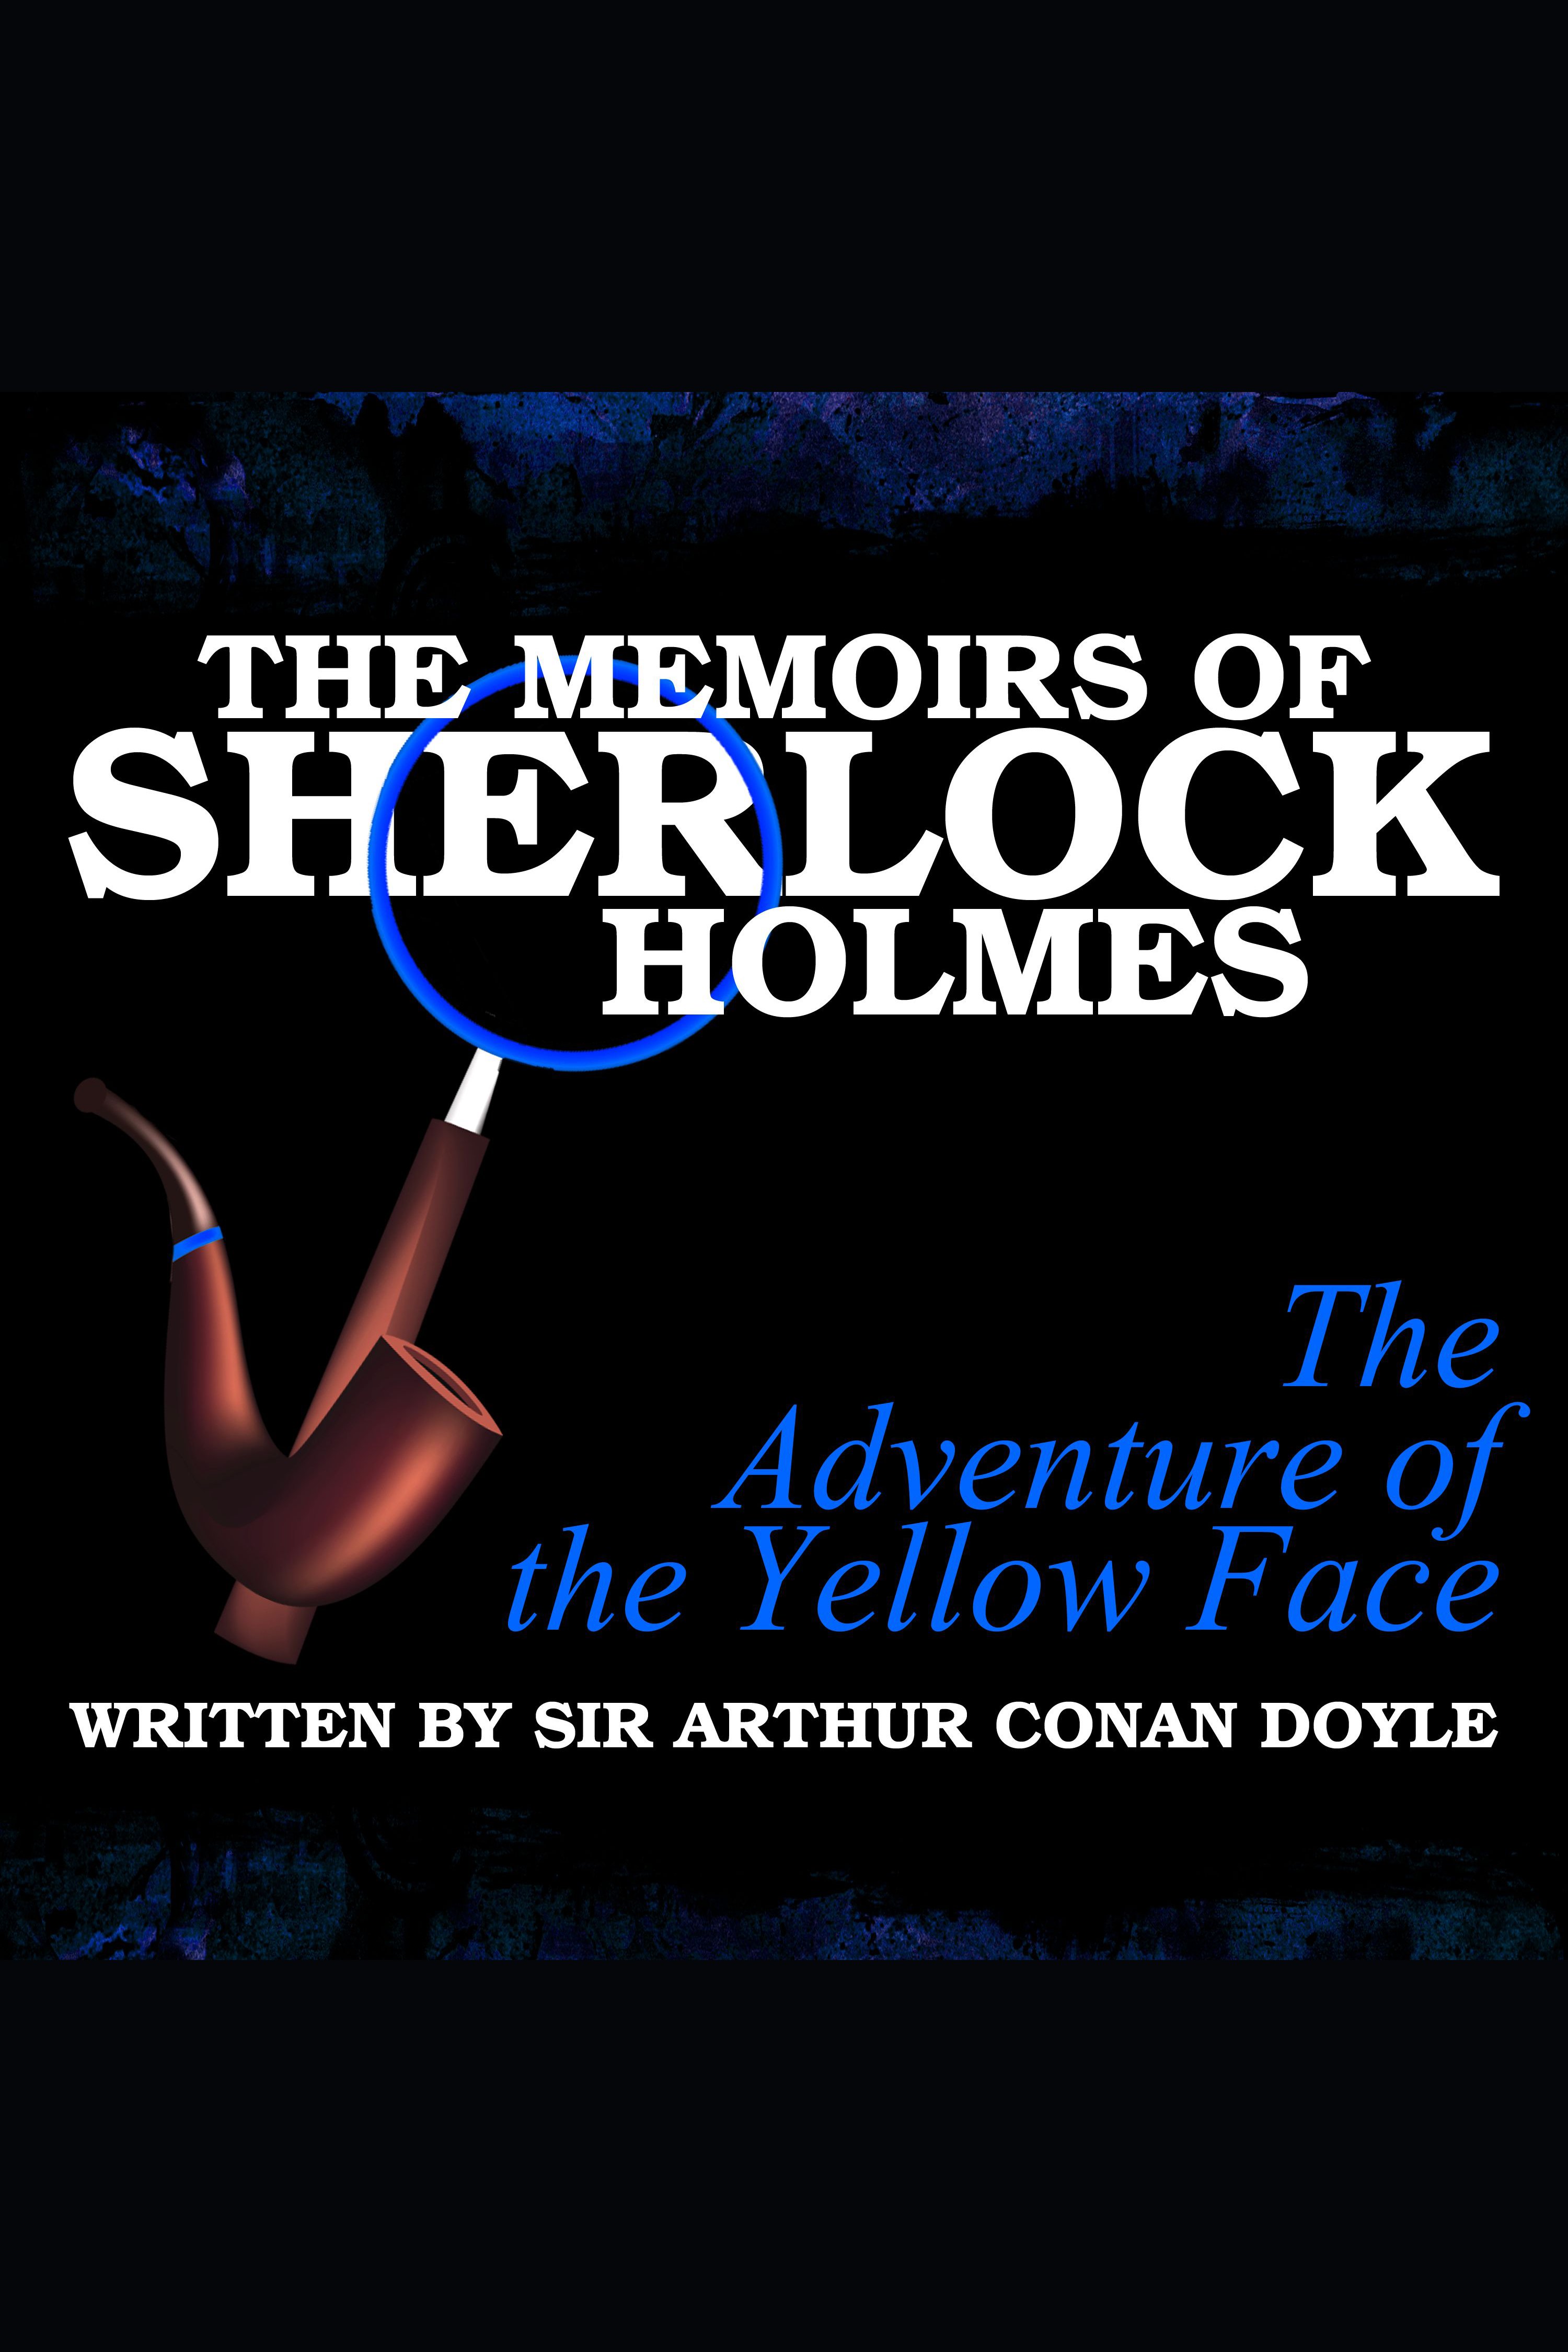 The Memoirs of Sherlock Holmes - The Adventure of the Yellow Face cover image